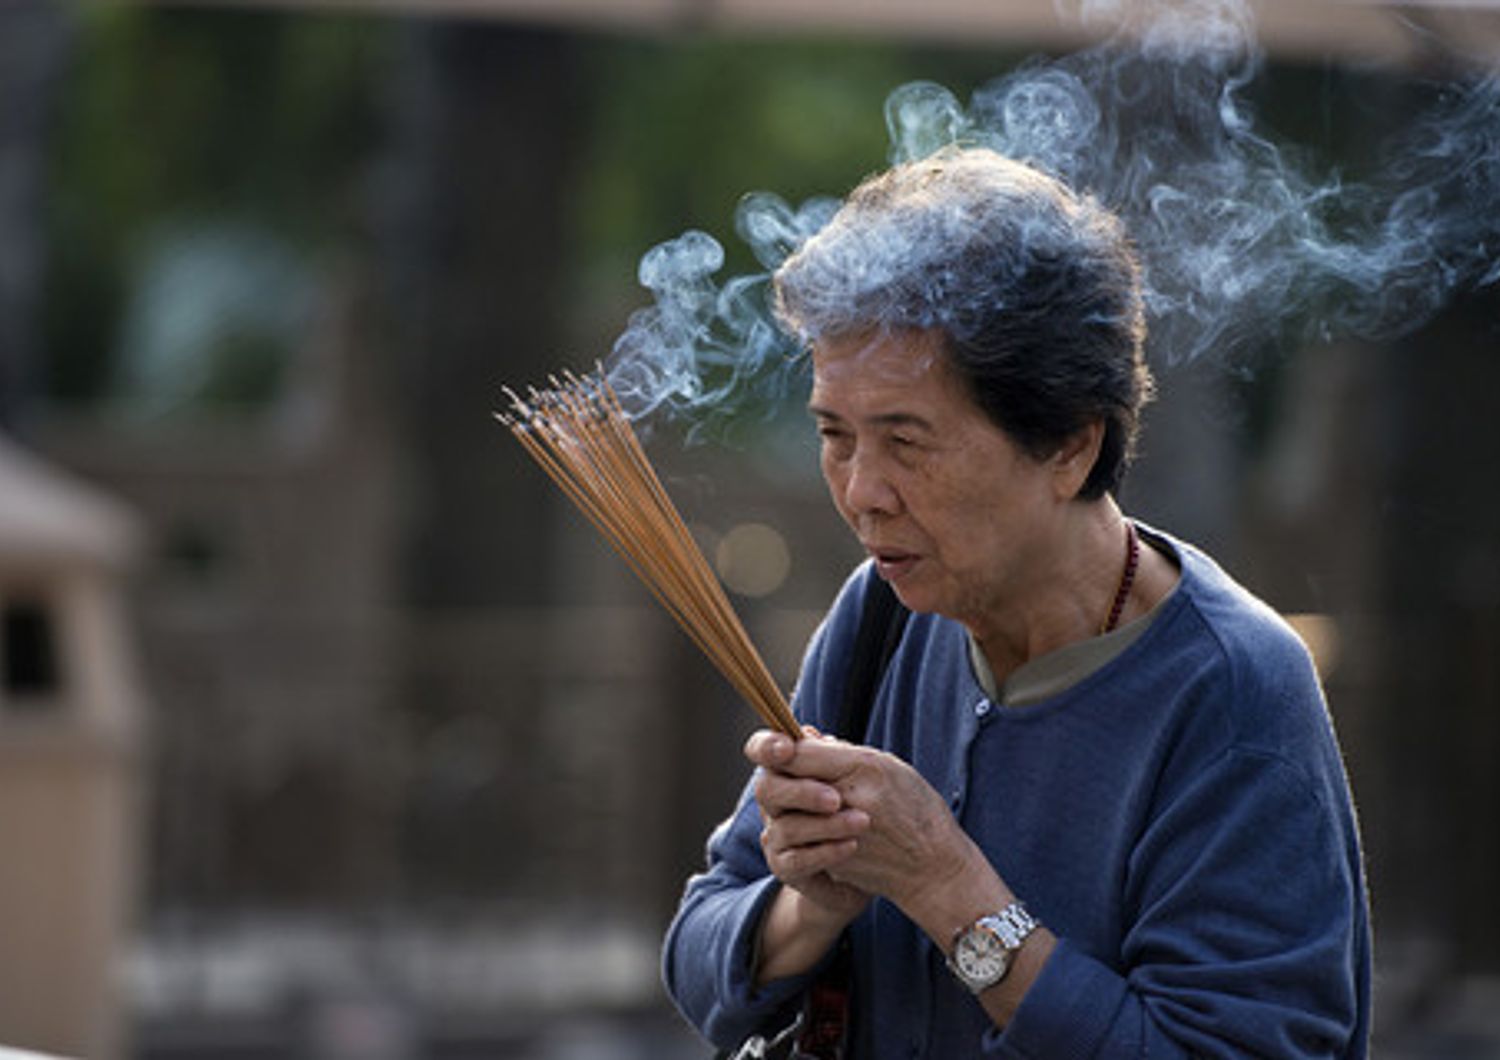 A woman prays holding incense sticks at the Wong Tai Sin temple in Hong Kong on October 28, 2013. The Taoist temple is a major tourist attraction and centre for worship in Hong Kong, and attracts thousands of visitors each year especially around the Chinese New Year holiday.&nbsp;